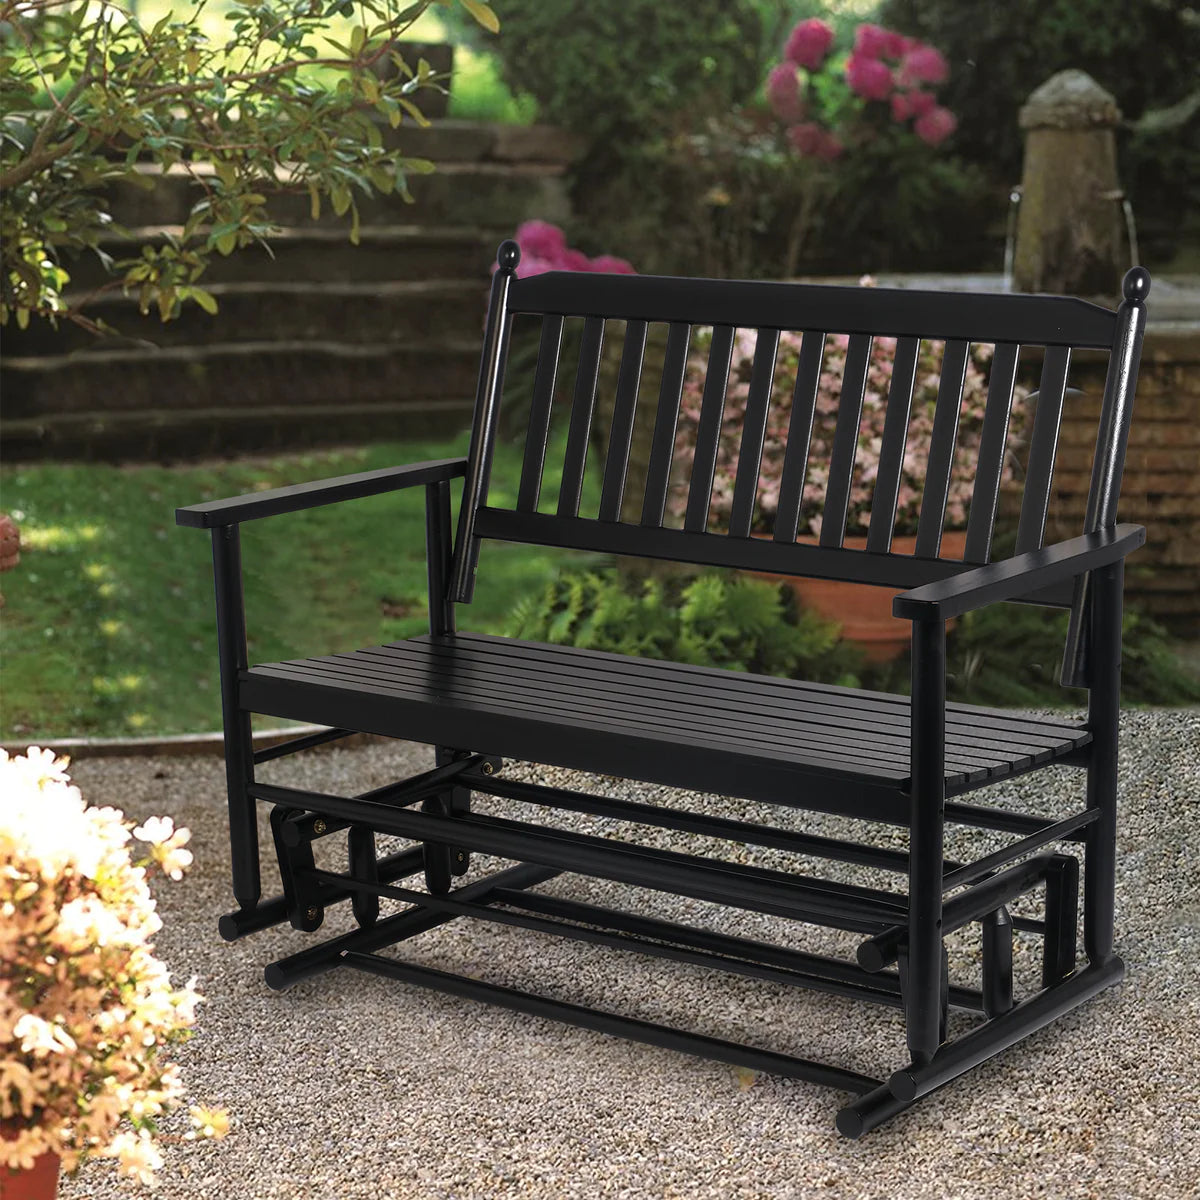 Outdoor Leisure Poplar wood Chair with Lower Layer of Storage Solid and Beautiful, Black